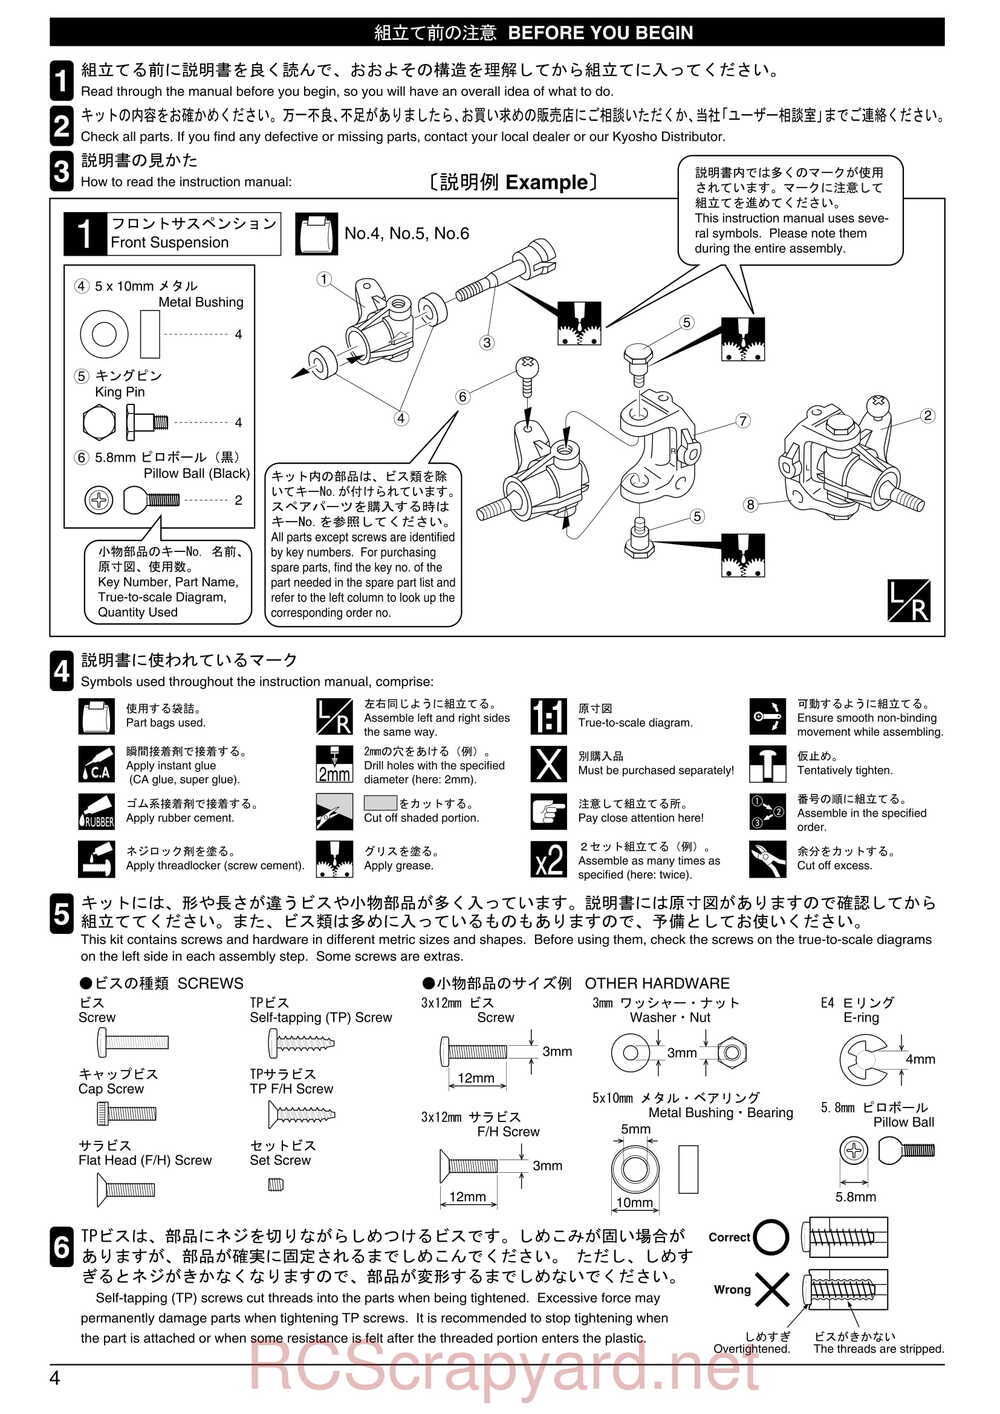 Kyosho - 31257 - V-One RRR Rubber - Manual - Page 04